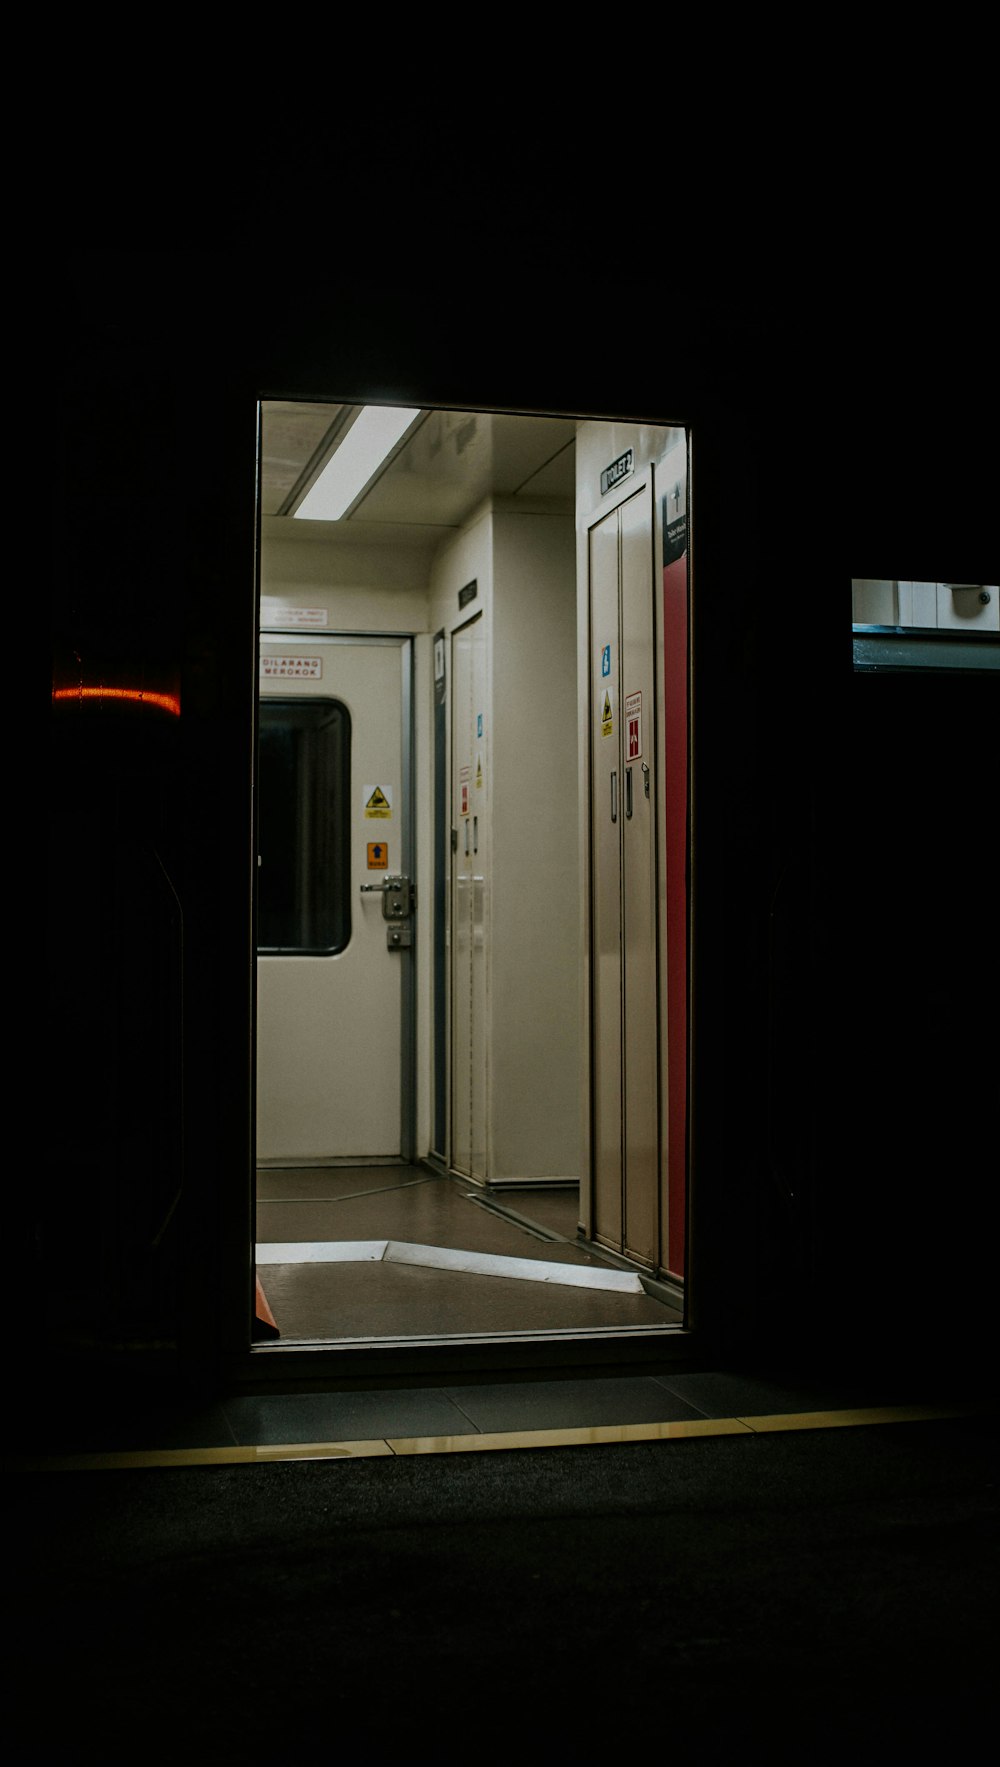 a train door is open at night time